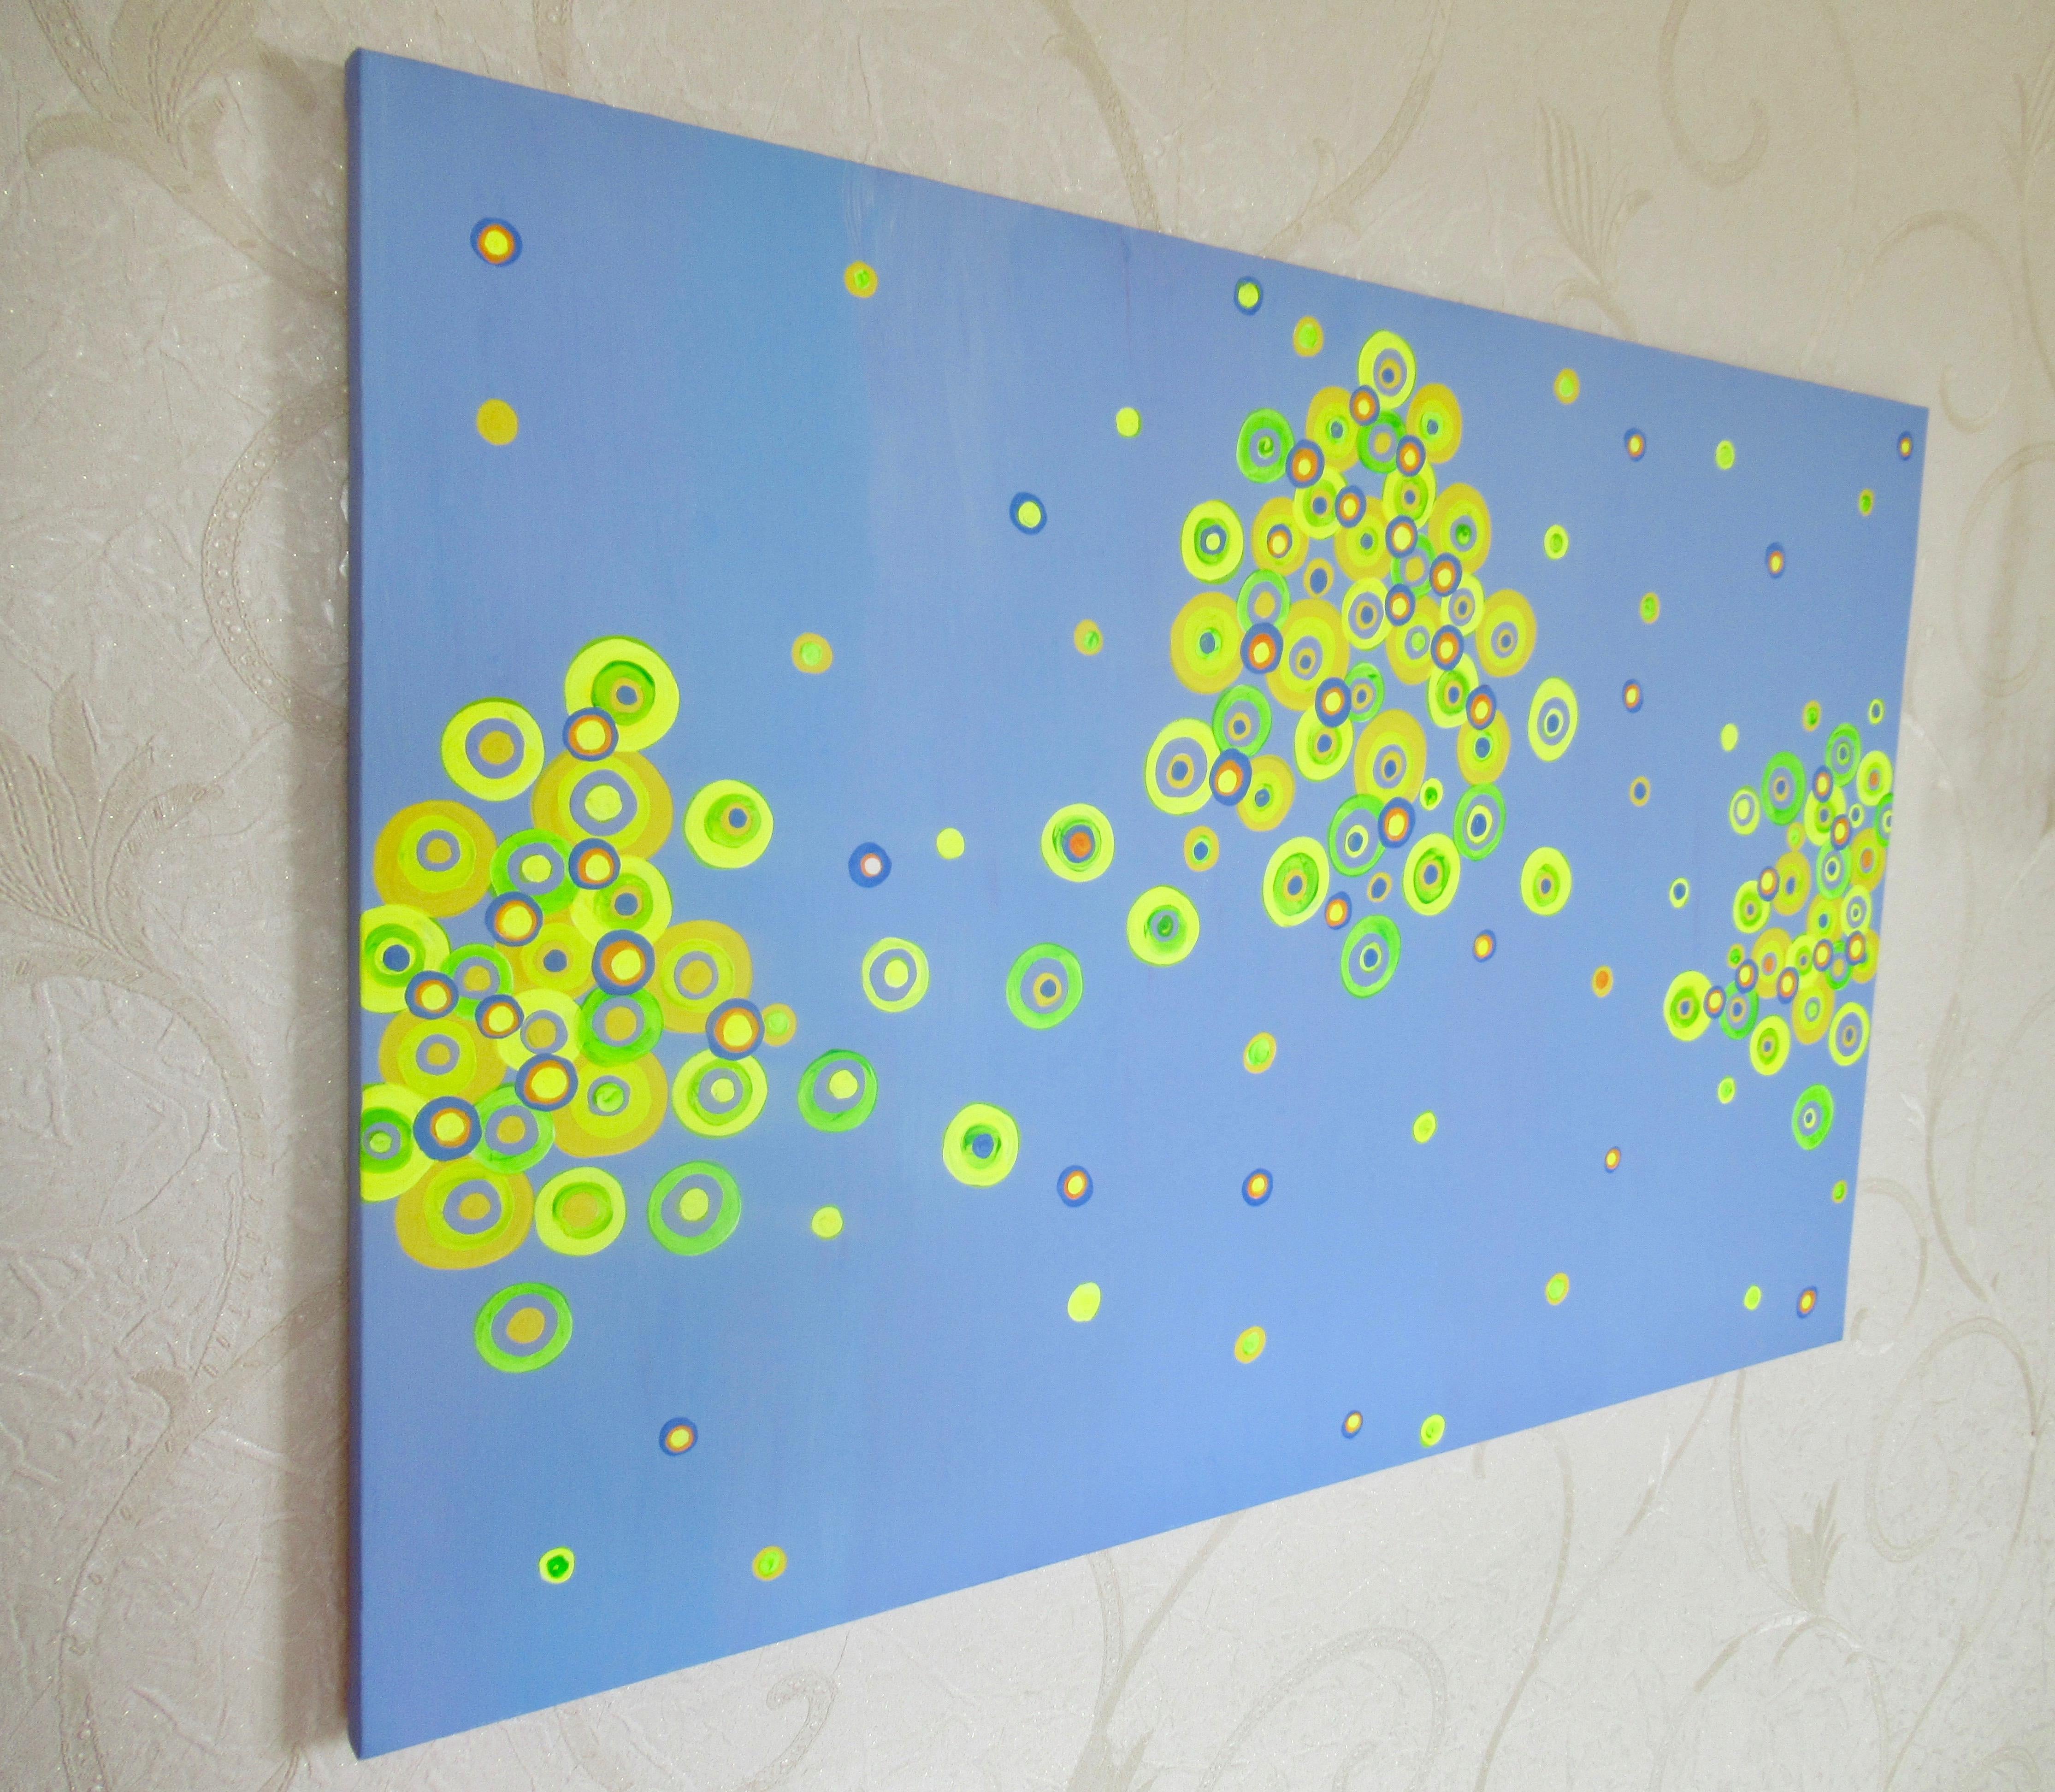 <p>Artist Comments<br />Happy-looking yellow-green orbs float merrily on a blue background, drifting along with the soft wind. Part of artist Natasha Tayles signature Circles series created with charming color combinations.</p><br /><p>About the